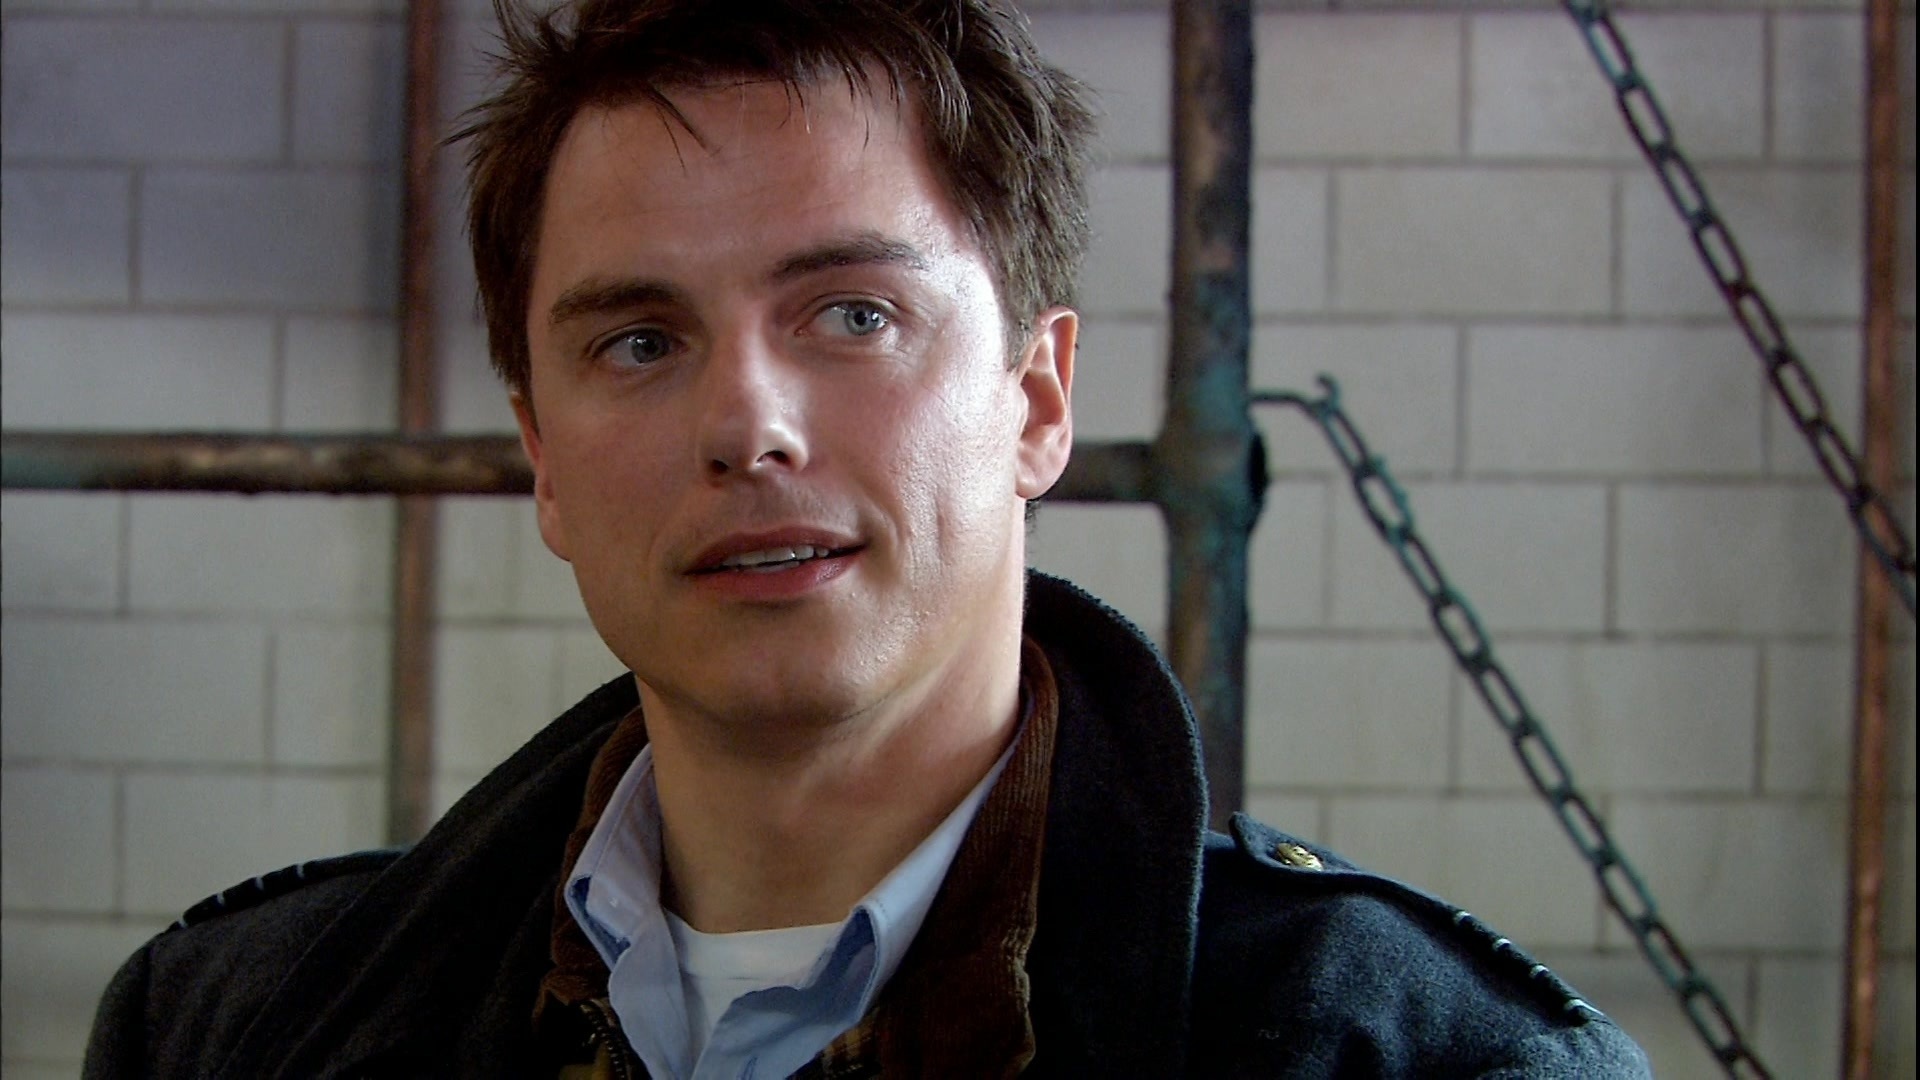 Torchwood Images on Fanpop 